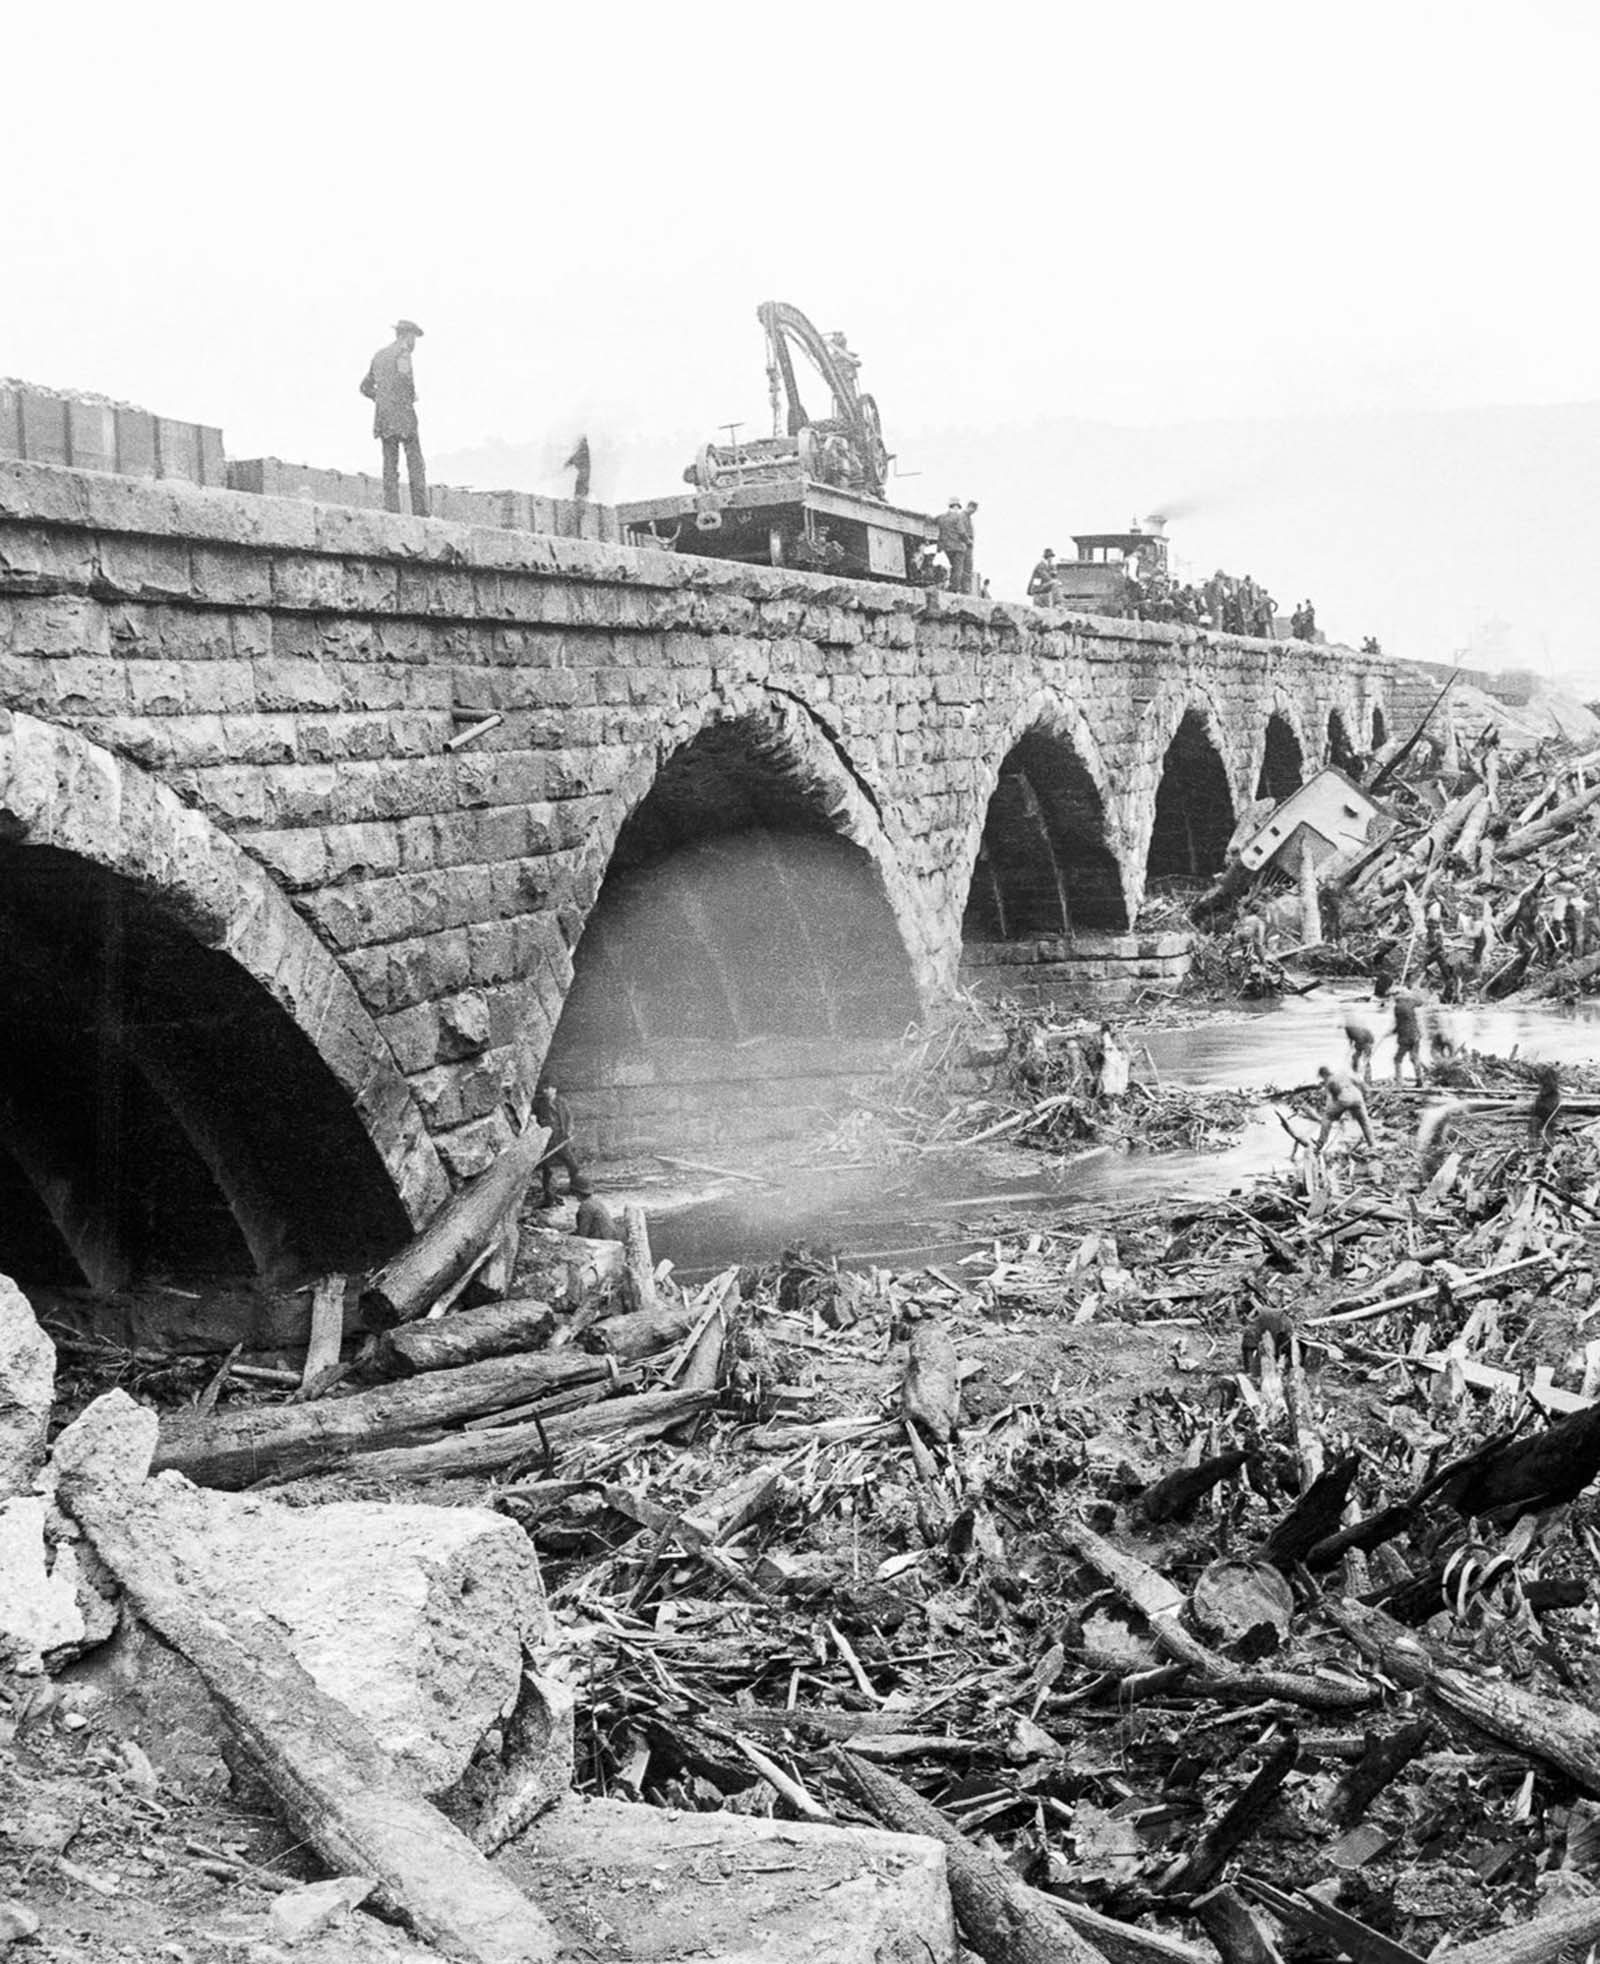 Volunteers search for bodies in the debris piled up against the stone bridge.